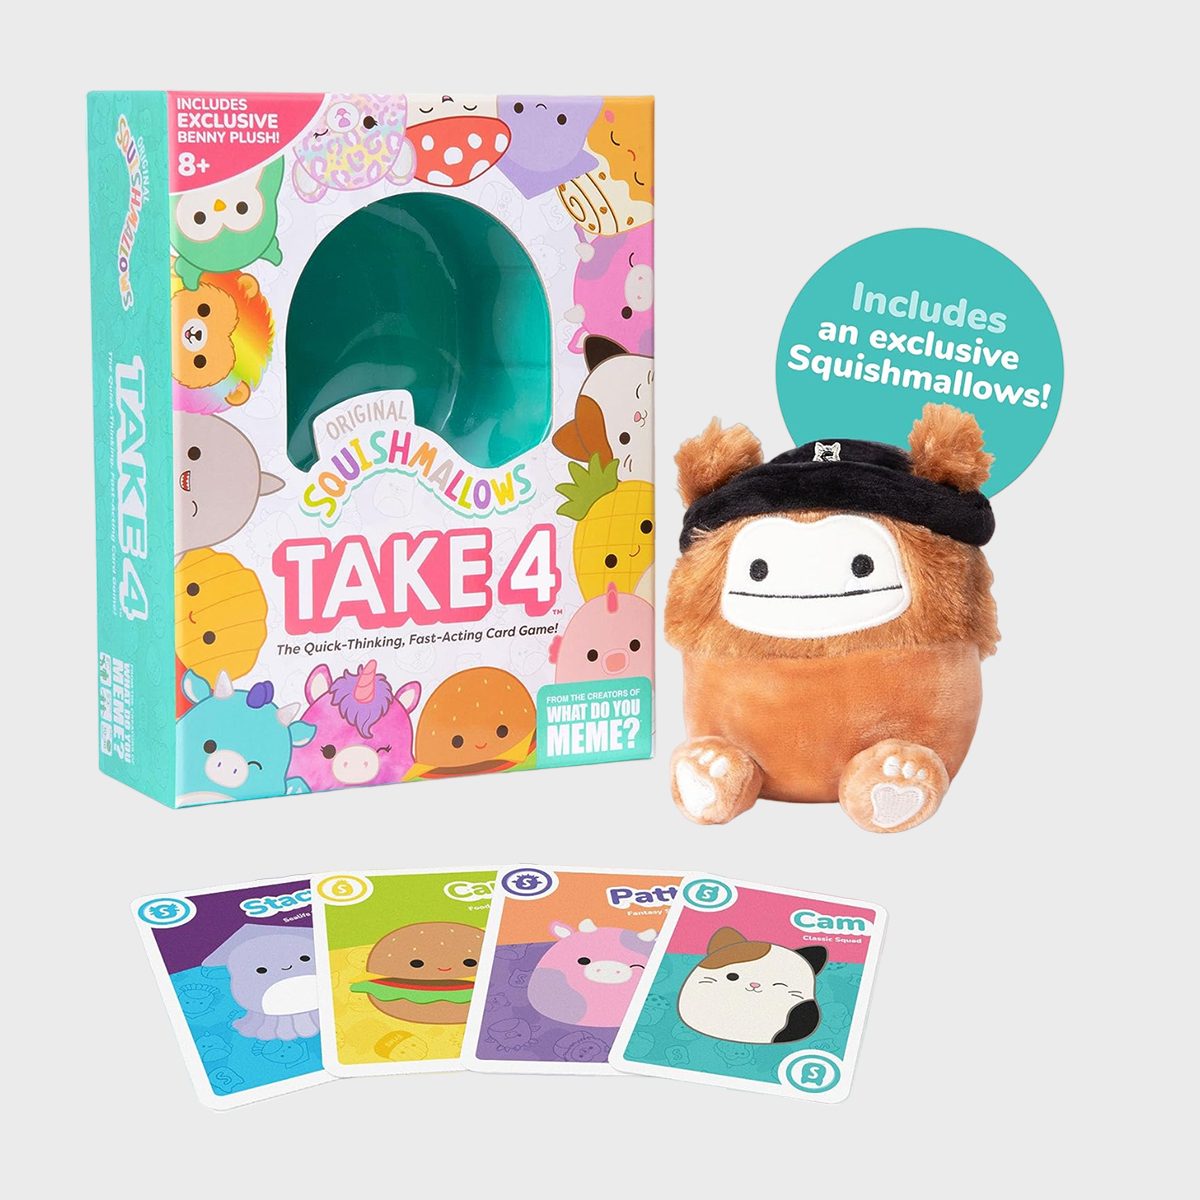 <p>This fast-paced <a href="https://www.amazon.com/Squishmallows-Take4-Fast-Paced-Family-Creators/dp/B0CBCXMQF3" rel="noopener noreferrer">Squishmallows card game</a> is the perfect way to add a little friendly competition to your next family game night or your tween's next sleepover. The objective? Be the first to collect four cards from the same Squad.</p> <p>And if you reach for the same card as someone else, you'll have to race to grab the exclusive (not to mention adorable) Benny The Bigfoot Squishmallow in the center. Whoever grabs Benny first gets to keep the card. If your family loves games, here are <a href="https://www.rd.com/list/classic-board-games/" rel="noopener noreferrer">30 classic board games everyone should own</a>.</p> <p class="listicle-page__cta-button-shop"><a class="shop-btn" href="https://www.amazon.com/Squishmallows-Take4-Fast-Paced-Family-Creators/dp/B0CBCXMQF3/">Shop Now</a></p>